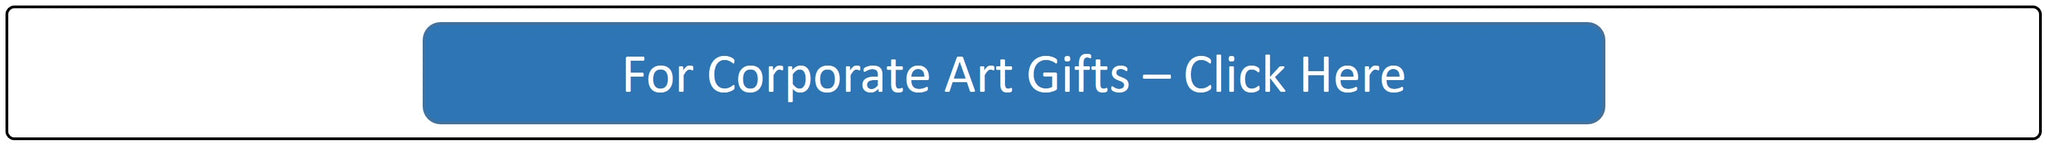 To Corporate Art Gifts